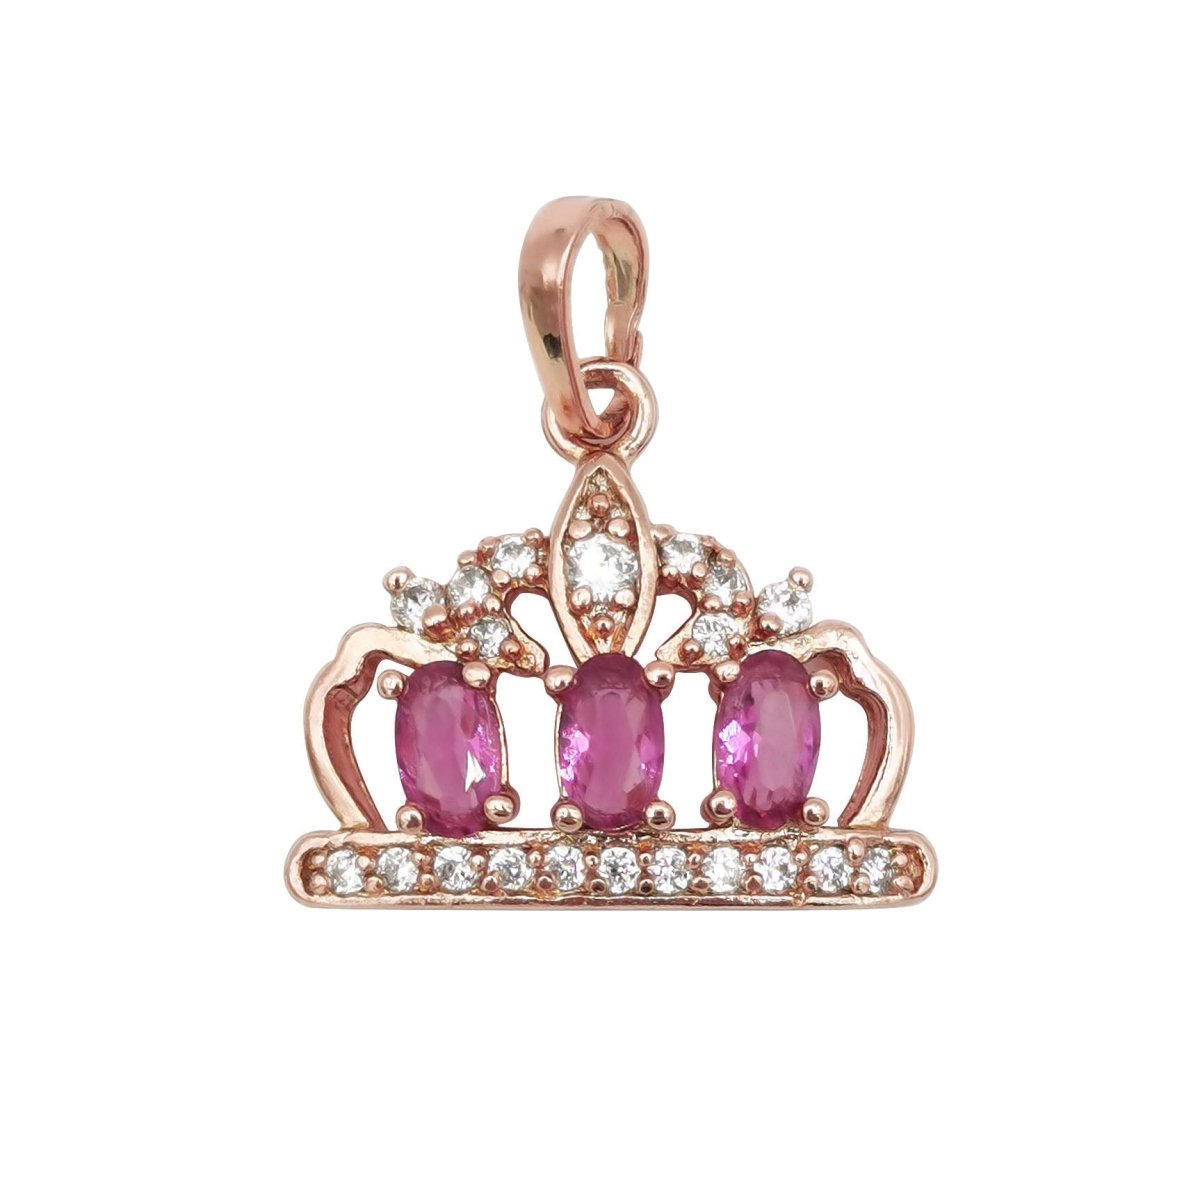 21X18mm Wholesale 18K Gold Filled Rose Gold Royal Crown Pendant with Pink Rhinestones, Queen Princess Tiara Pendant For Necklace Bracelet Anklet Making, Emerald Crown CZ Jewelry Component Supply J-176 - DLUXCA